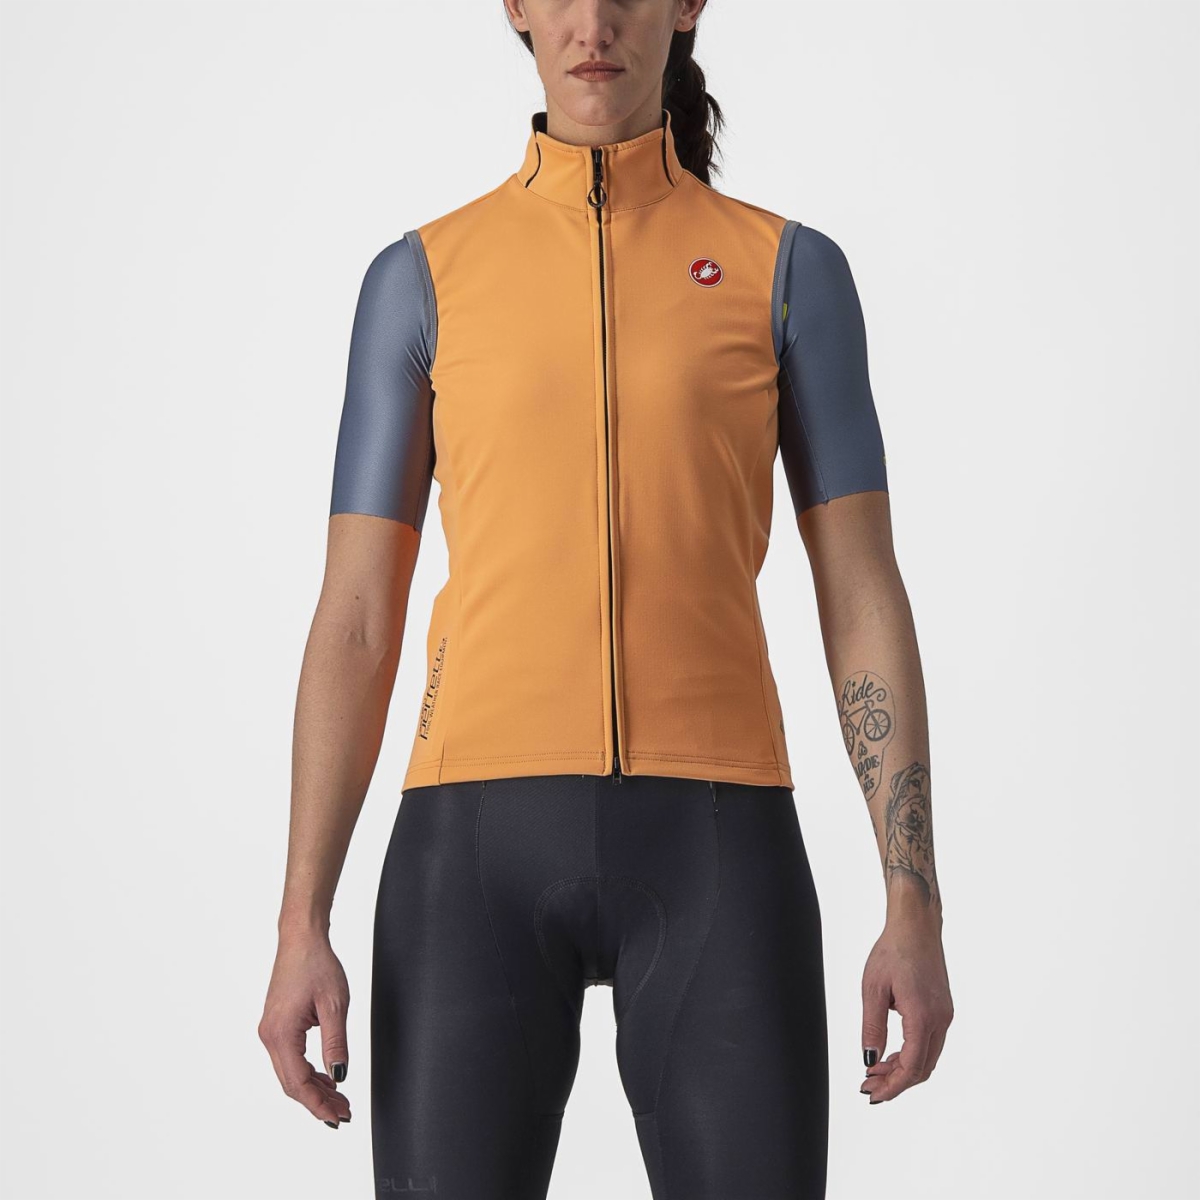 Injusto cola doble Chalecos Ciclismo Mujer PERFETTO RoS 2 W VEST - Castelli Cycling